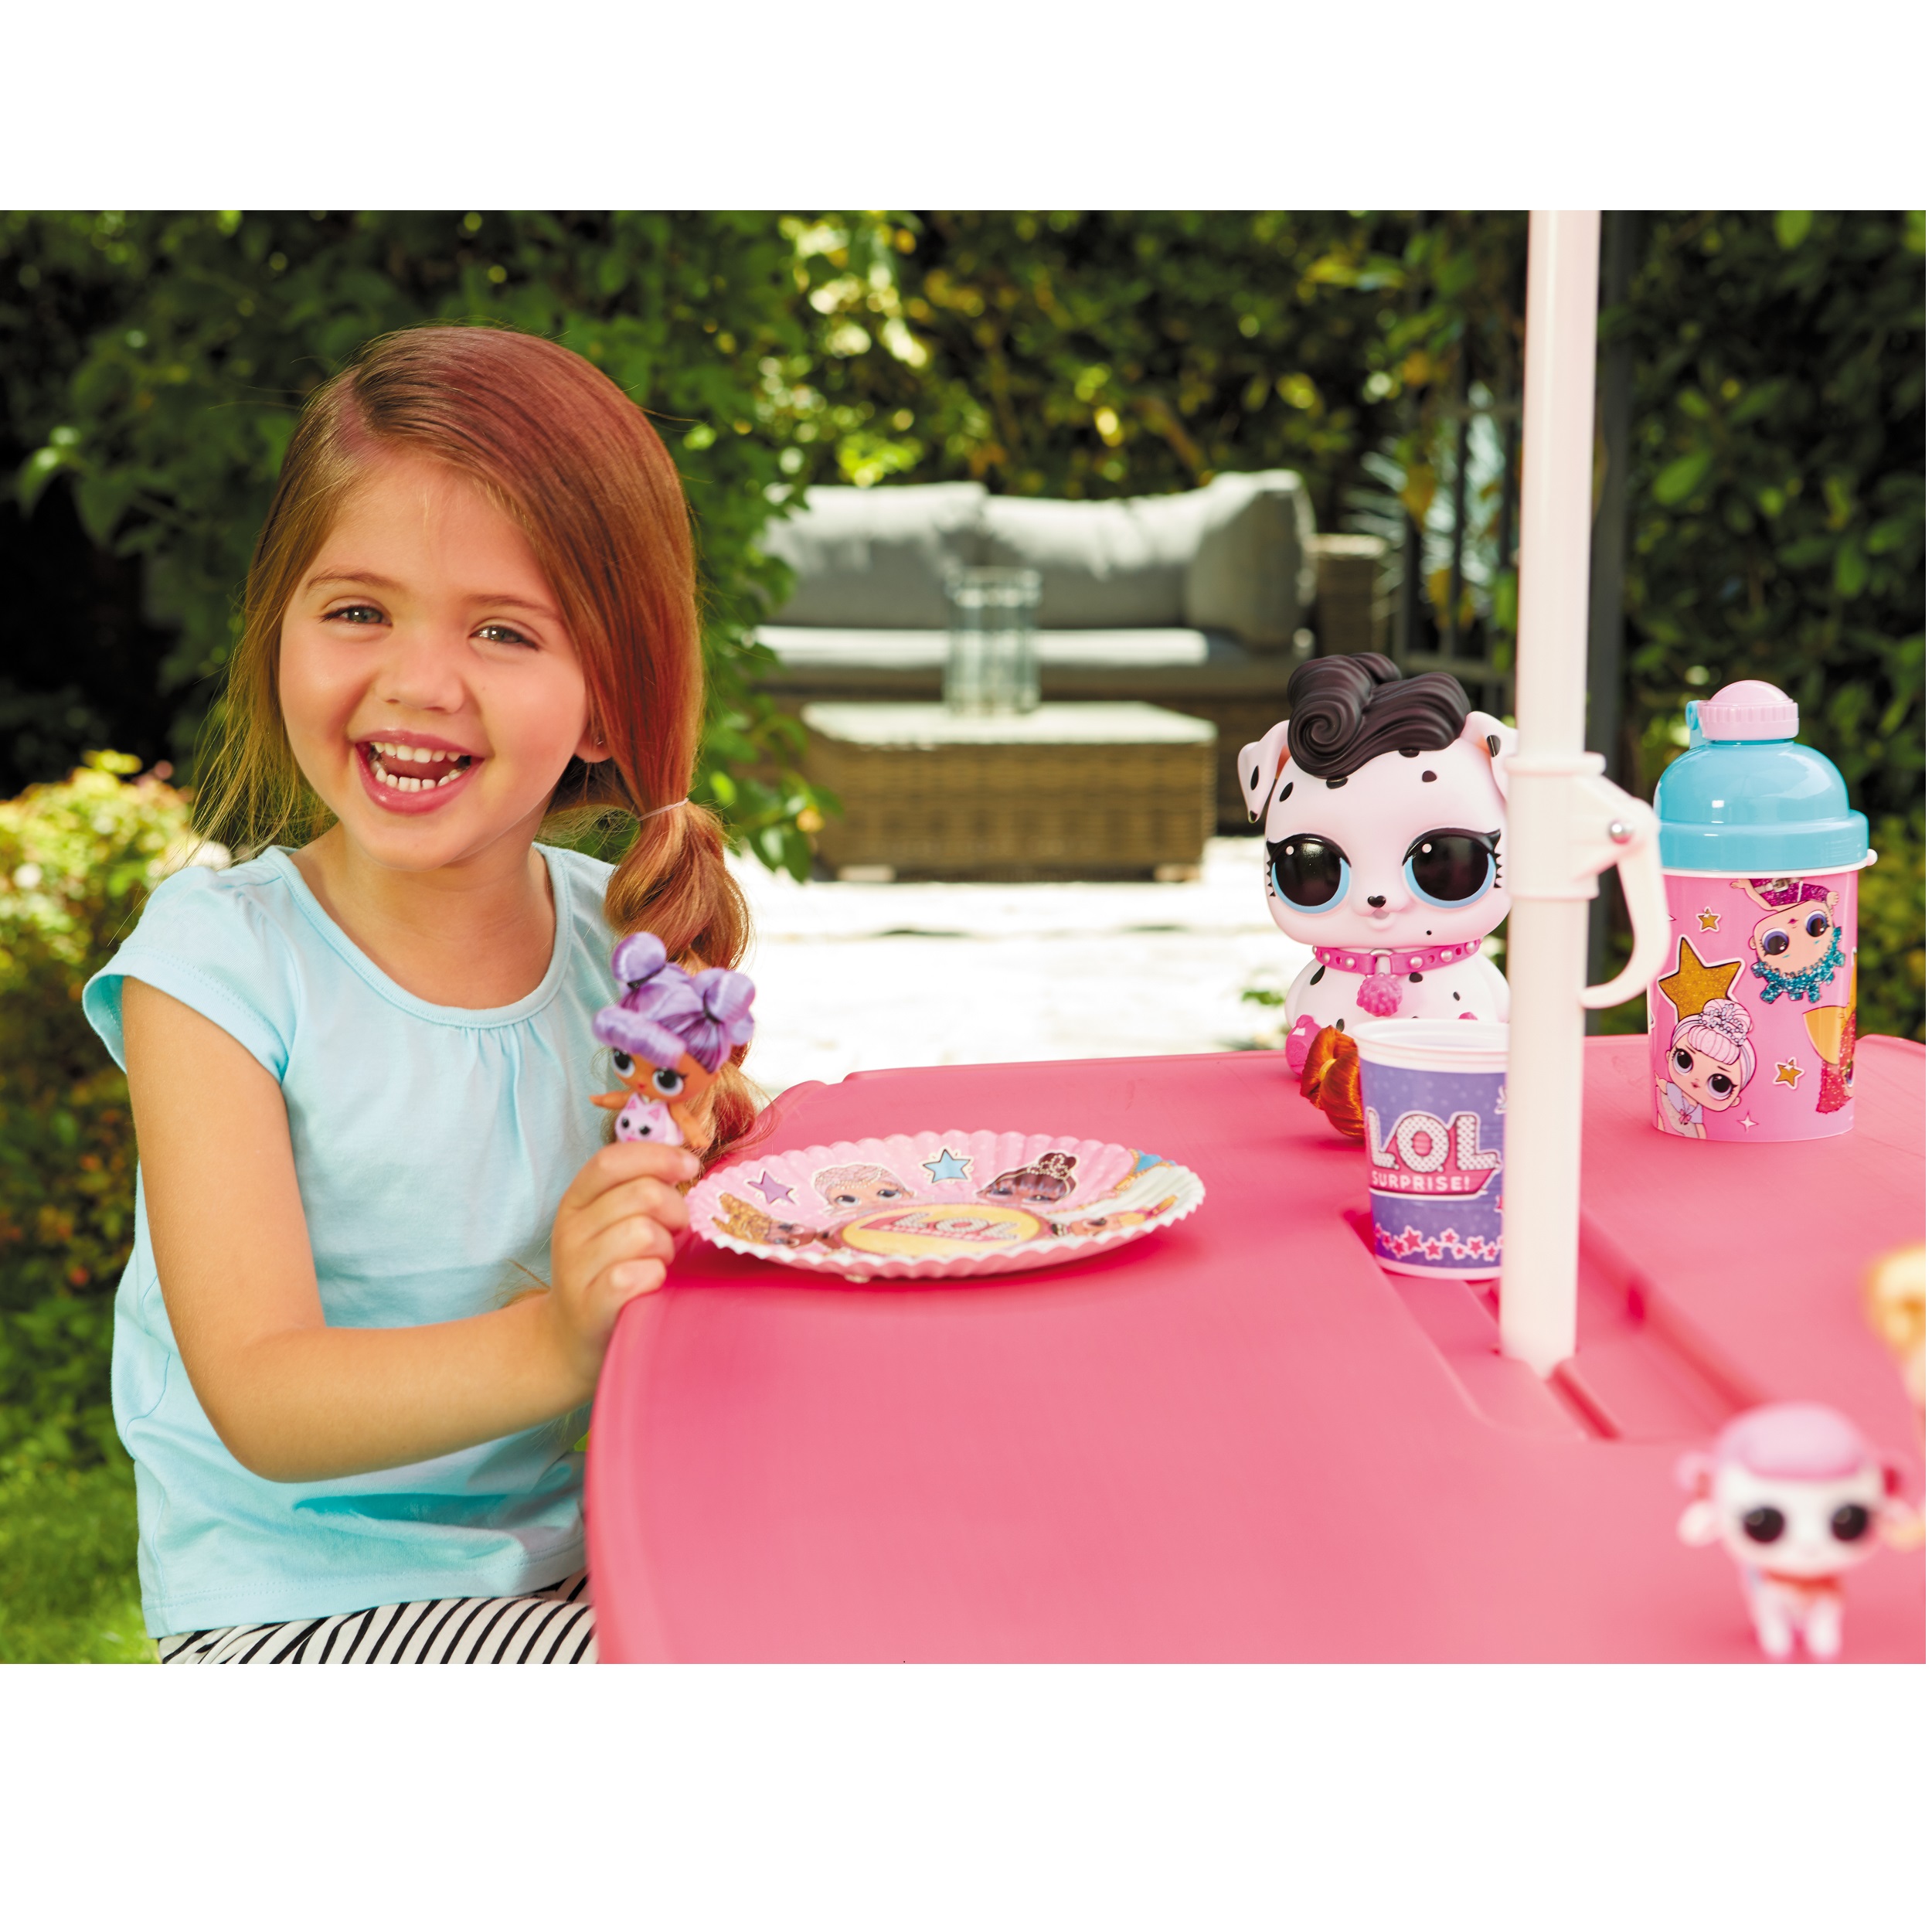 L.O.L Surprise! Birthday Party Kids Picnic Table with Umbrella, Great Gift for Kids Ages 4, 5, 6+ - image 5 of 7